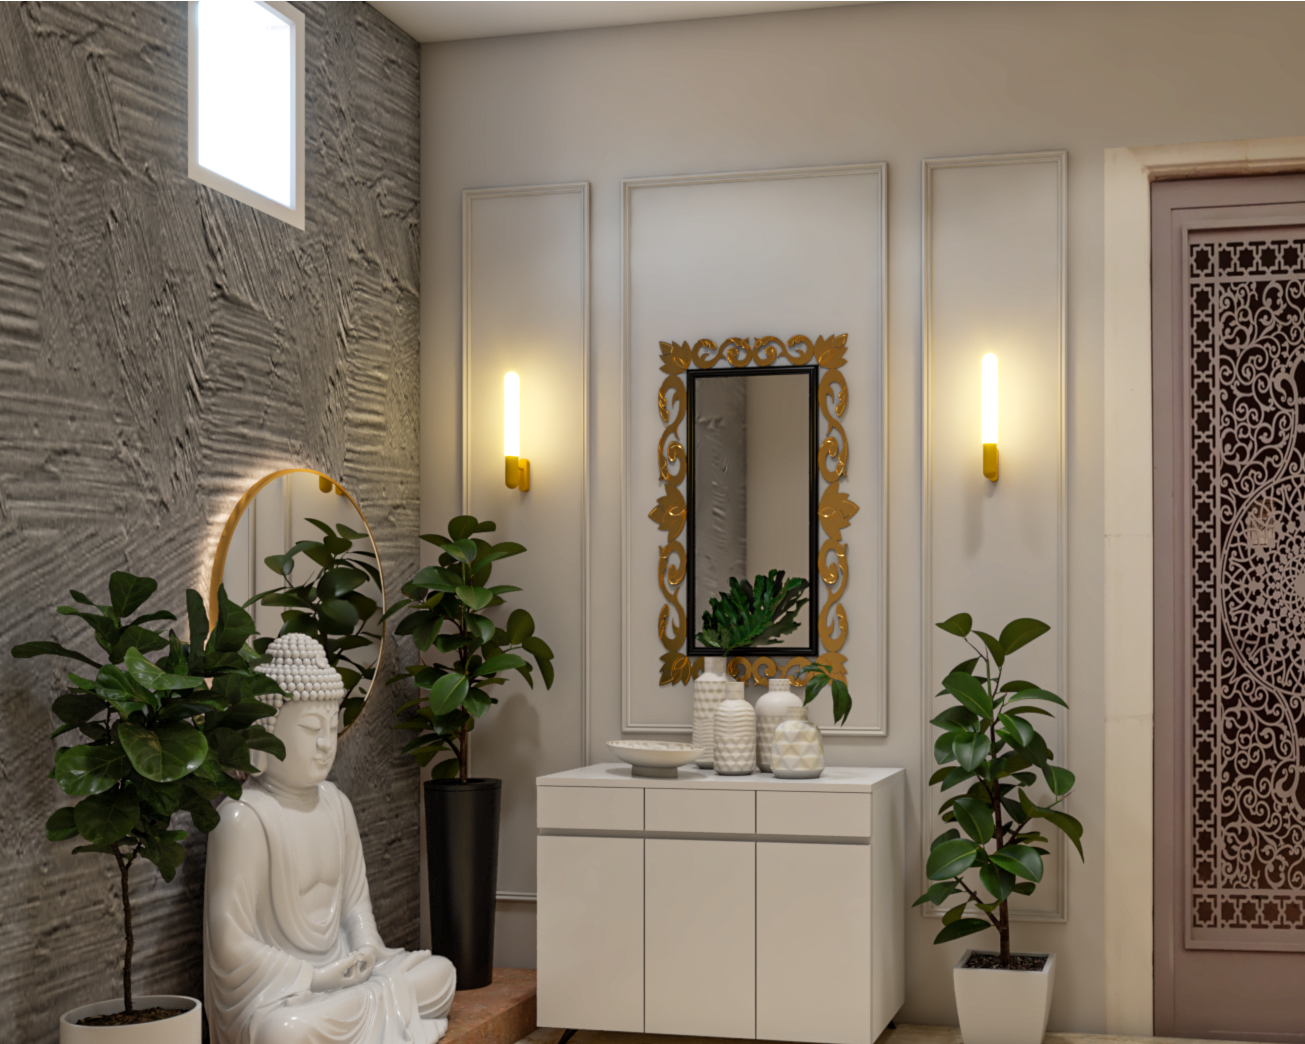 Classic Spacious Foyer Design With Buddha Statue